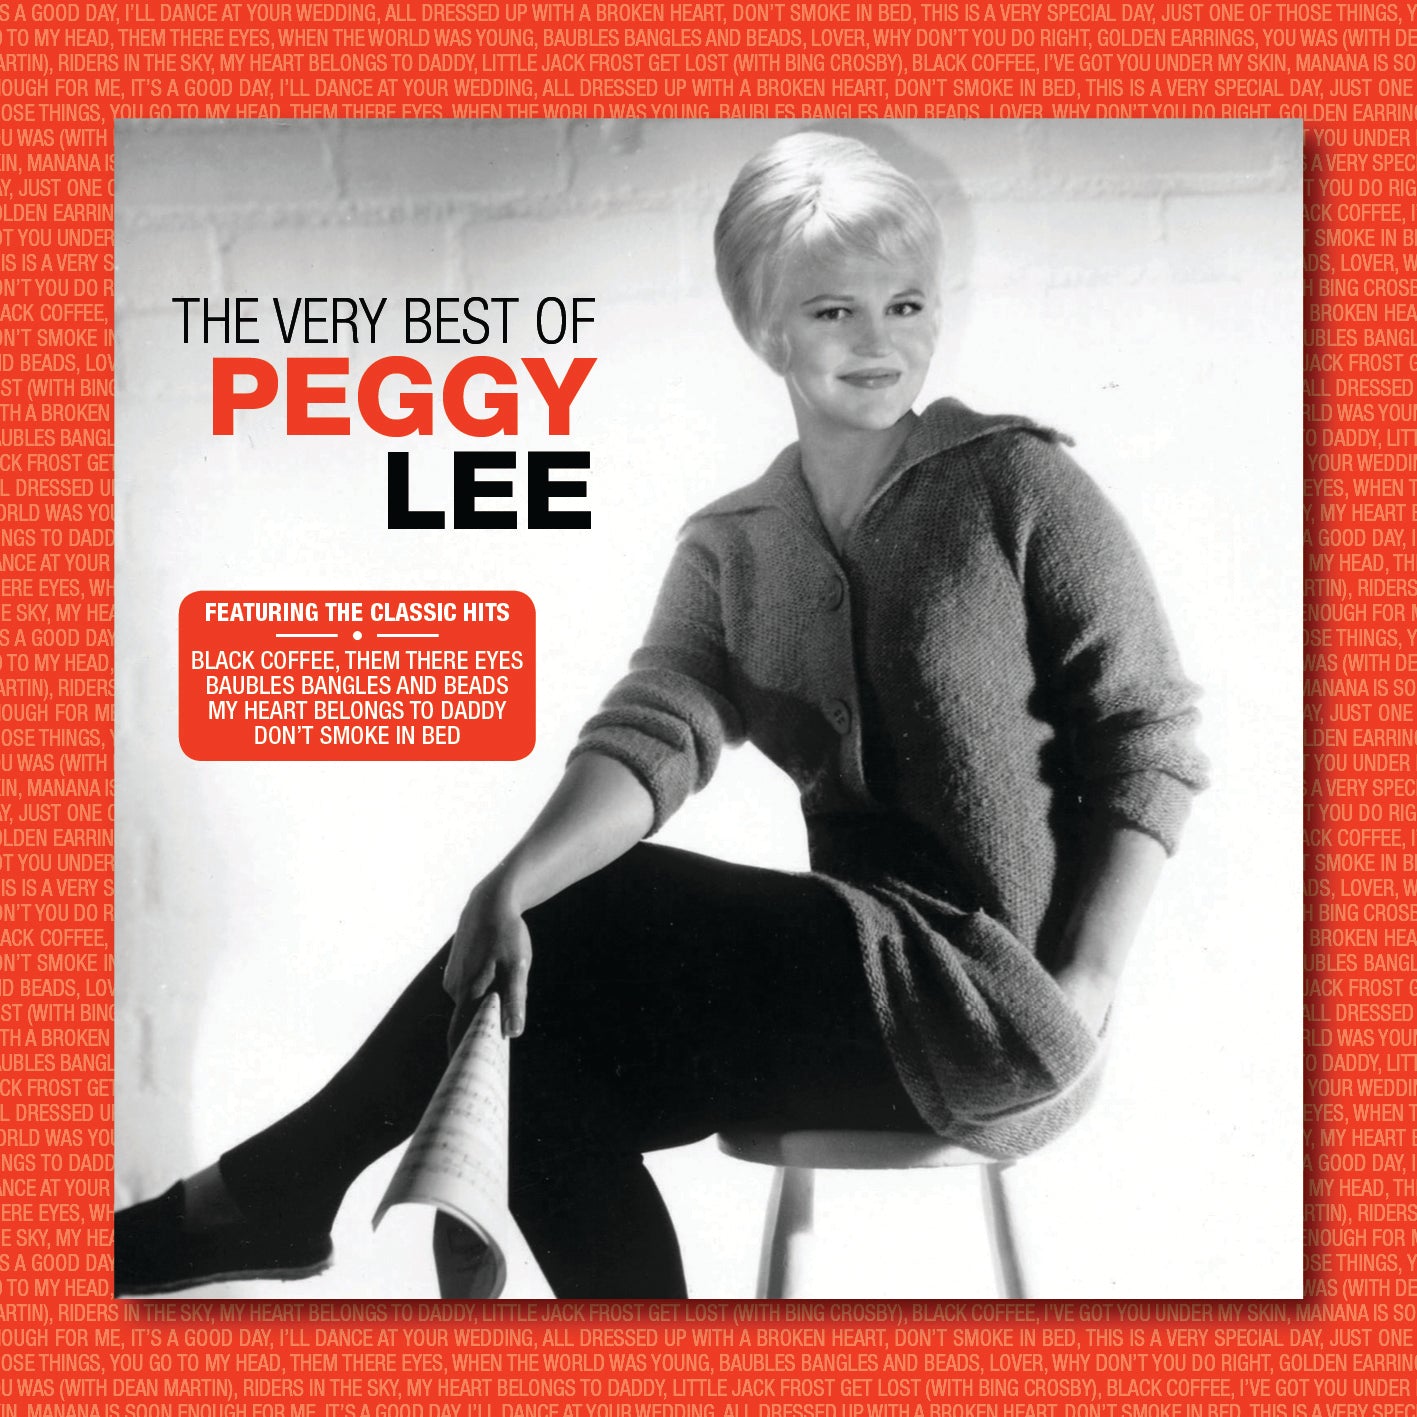 PEGGY LEE - THE VERY BEST OF